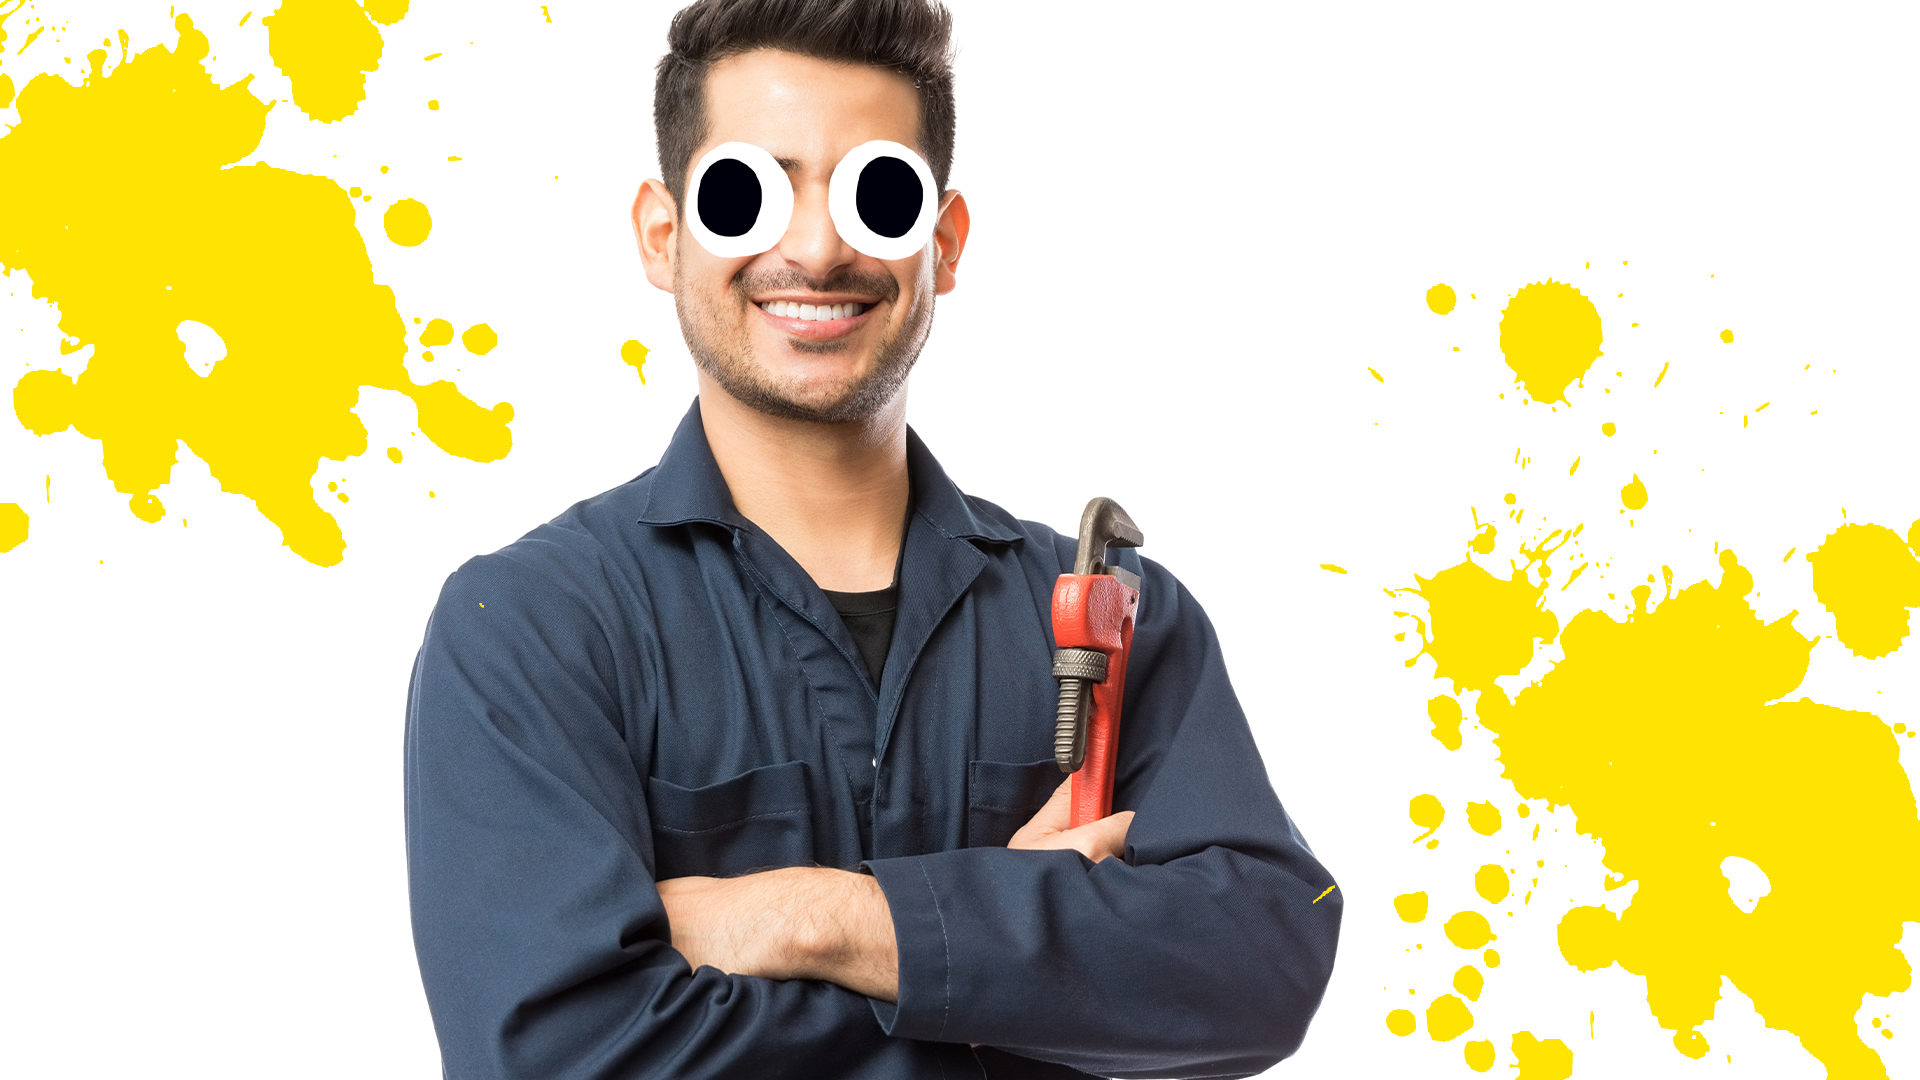 Smiling plumber with yellow splats